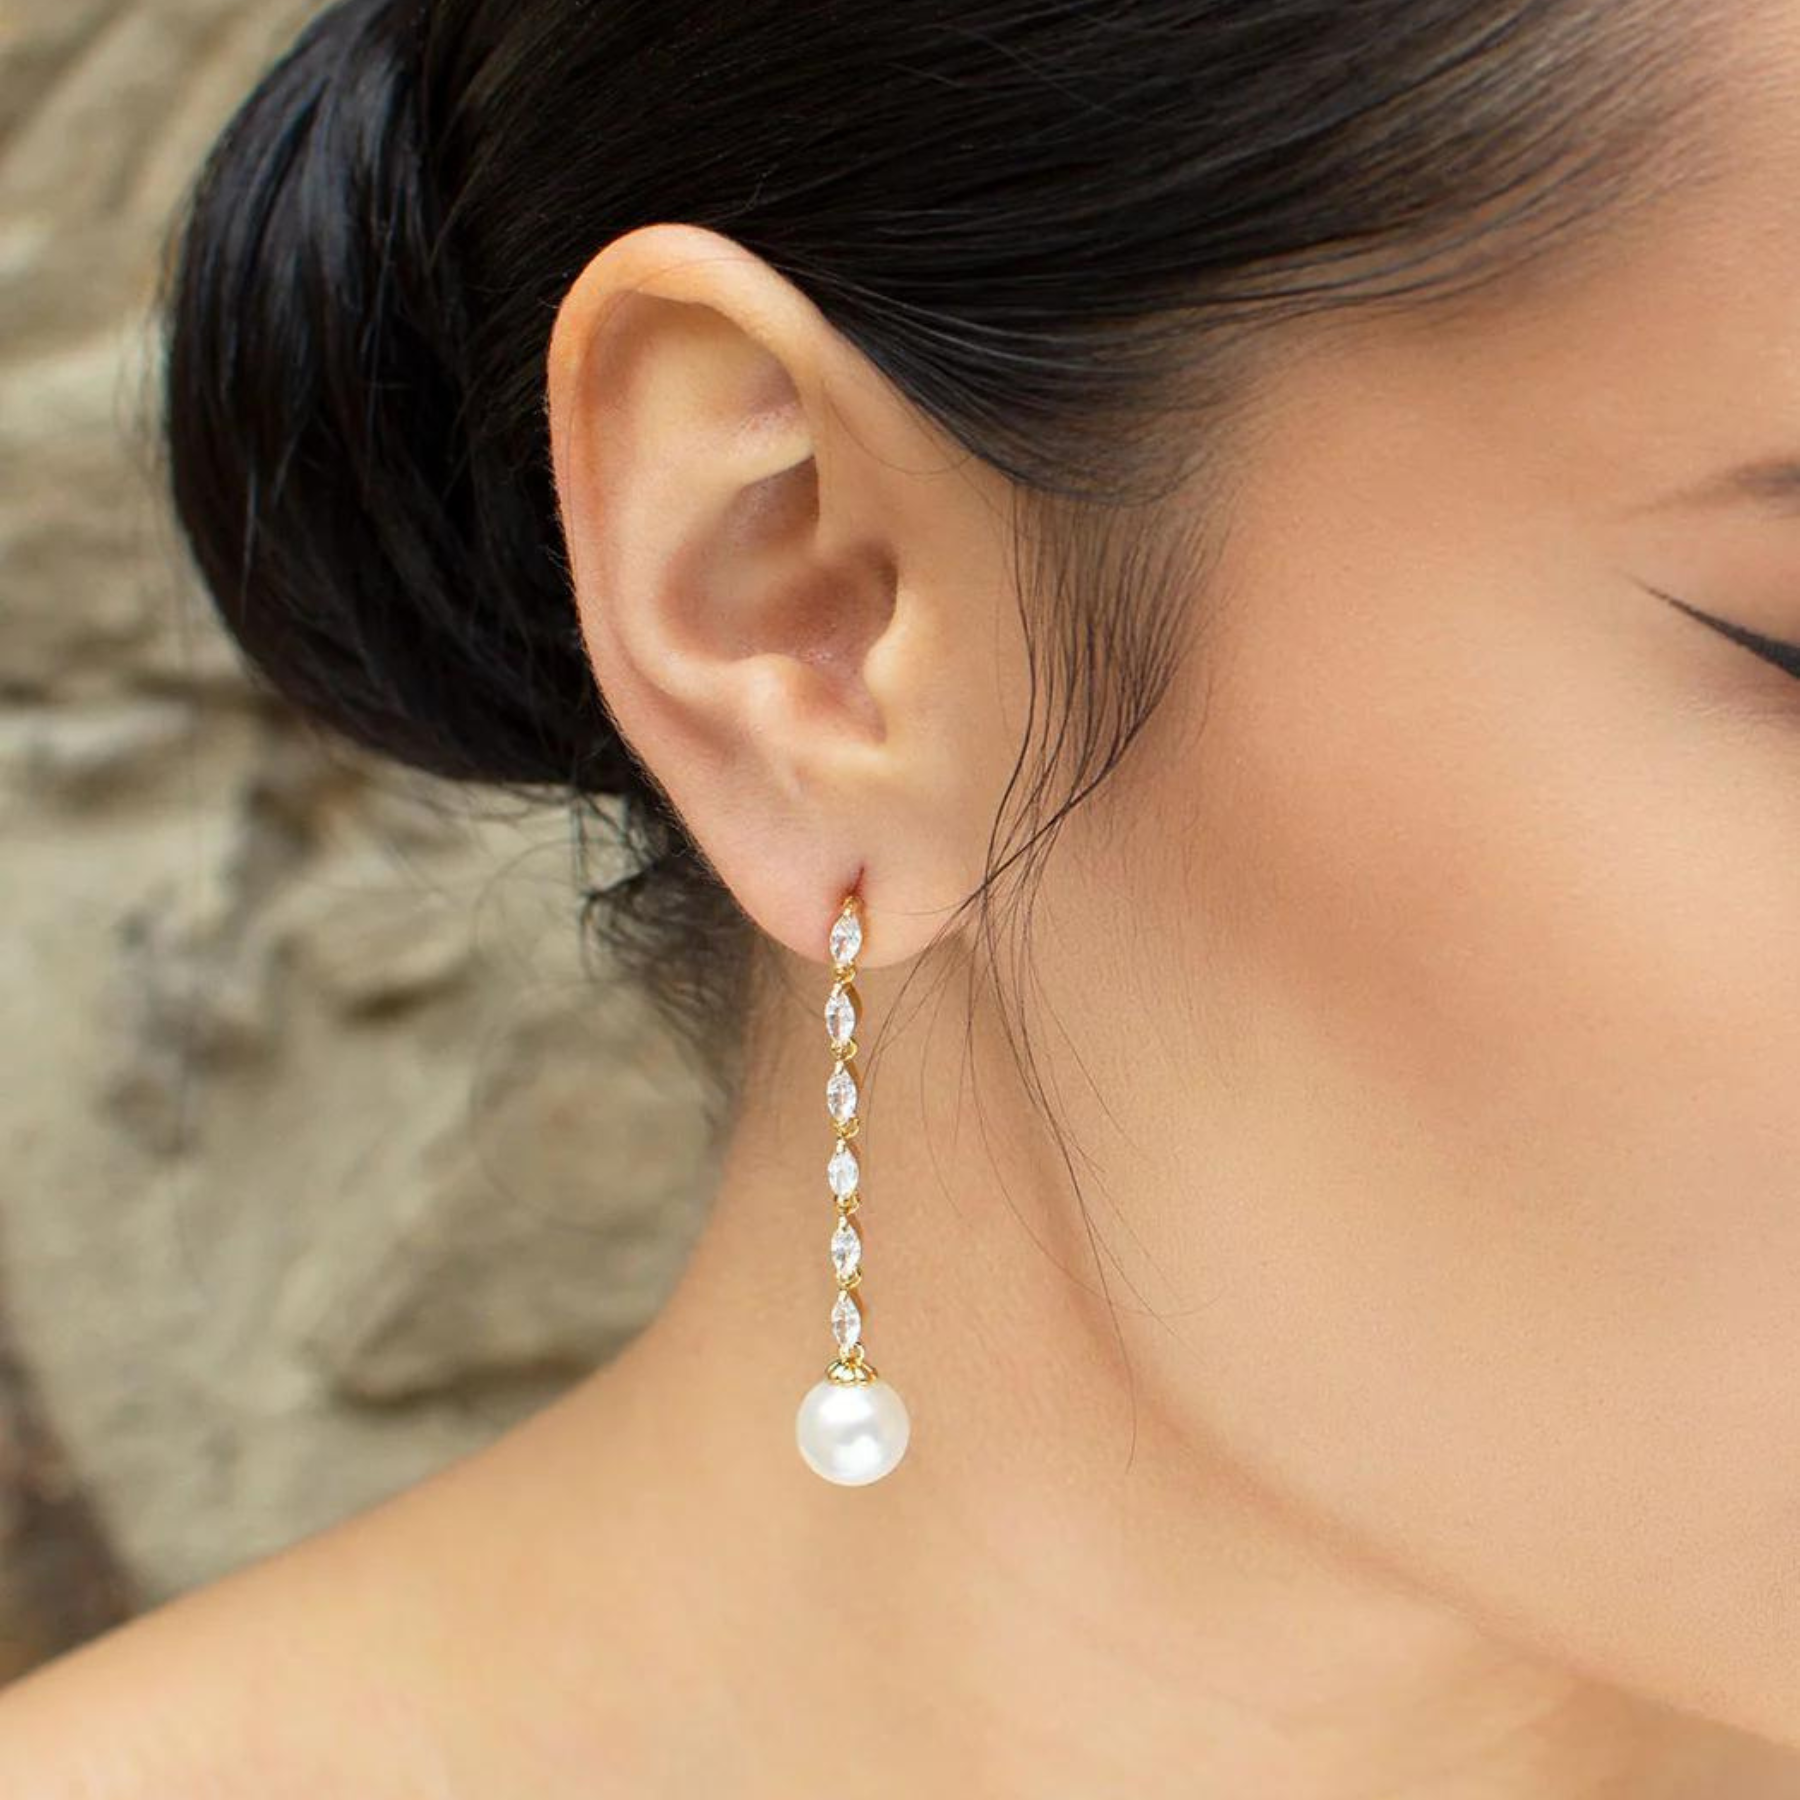 Classic Bridal Pearl Drop Earrings for Wedding and Special Occasion - Glitz  And Love